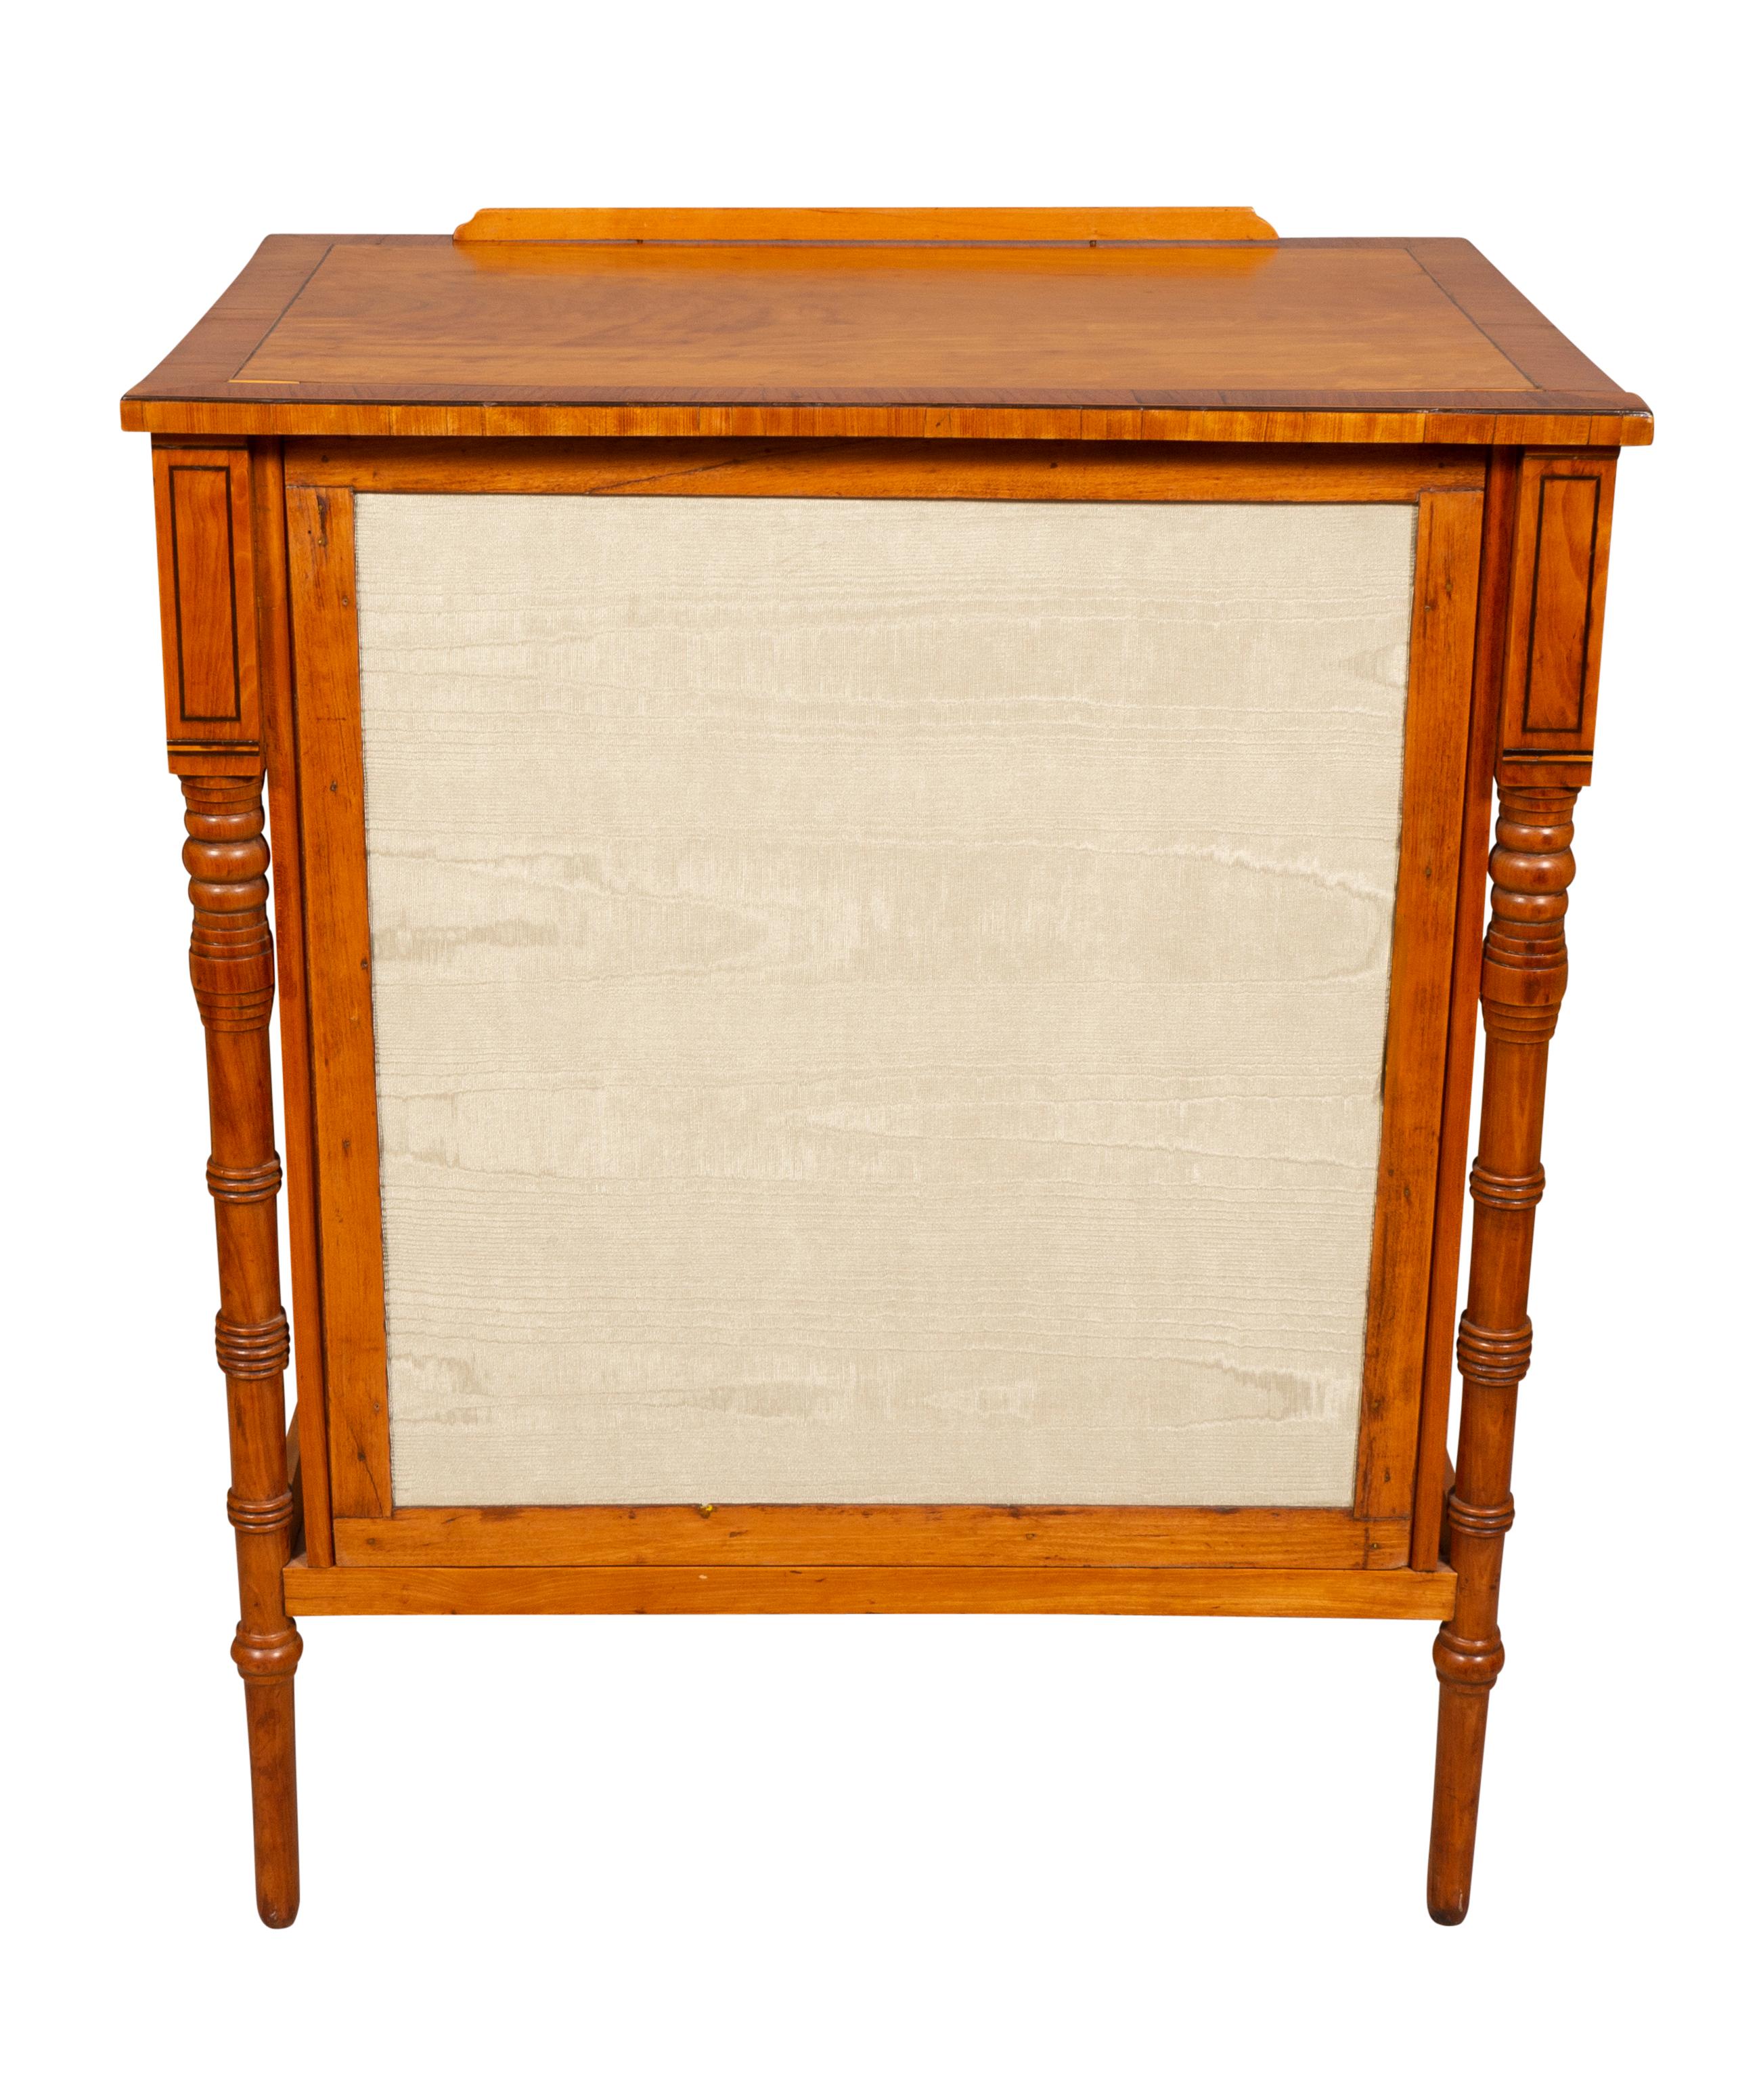 Late 18th Century George III Satinwood And Tulipwood Work Table For Sale